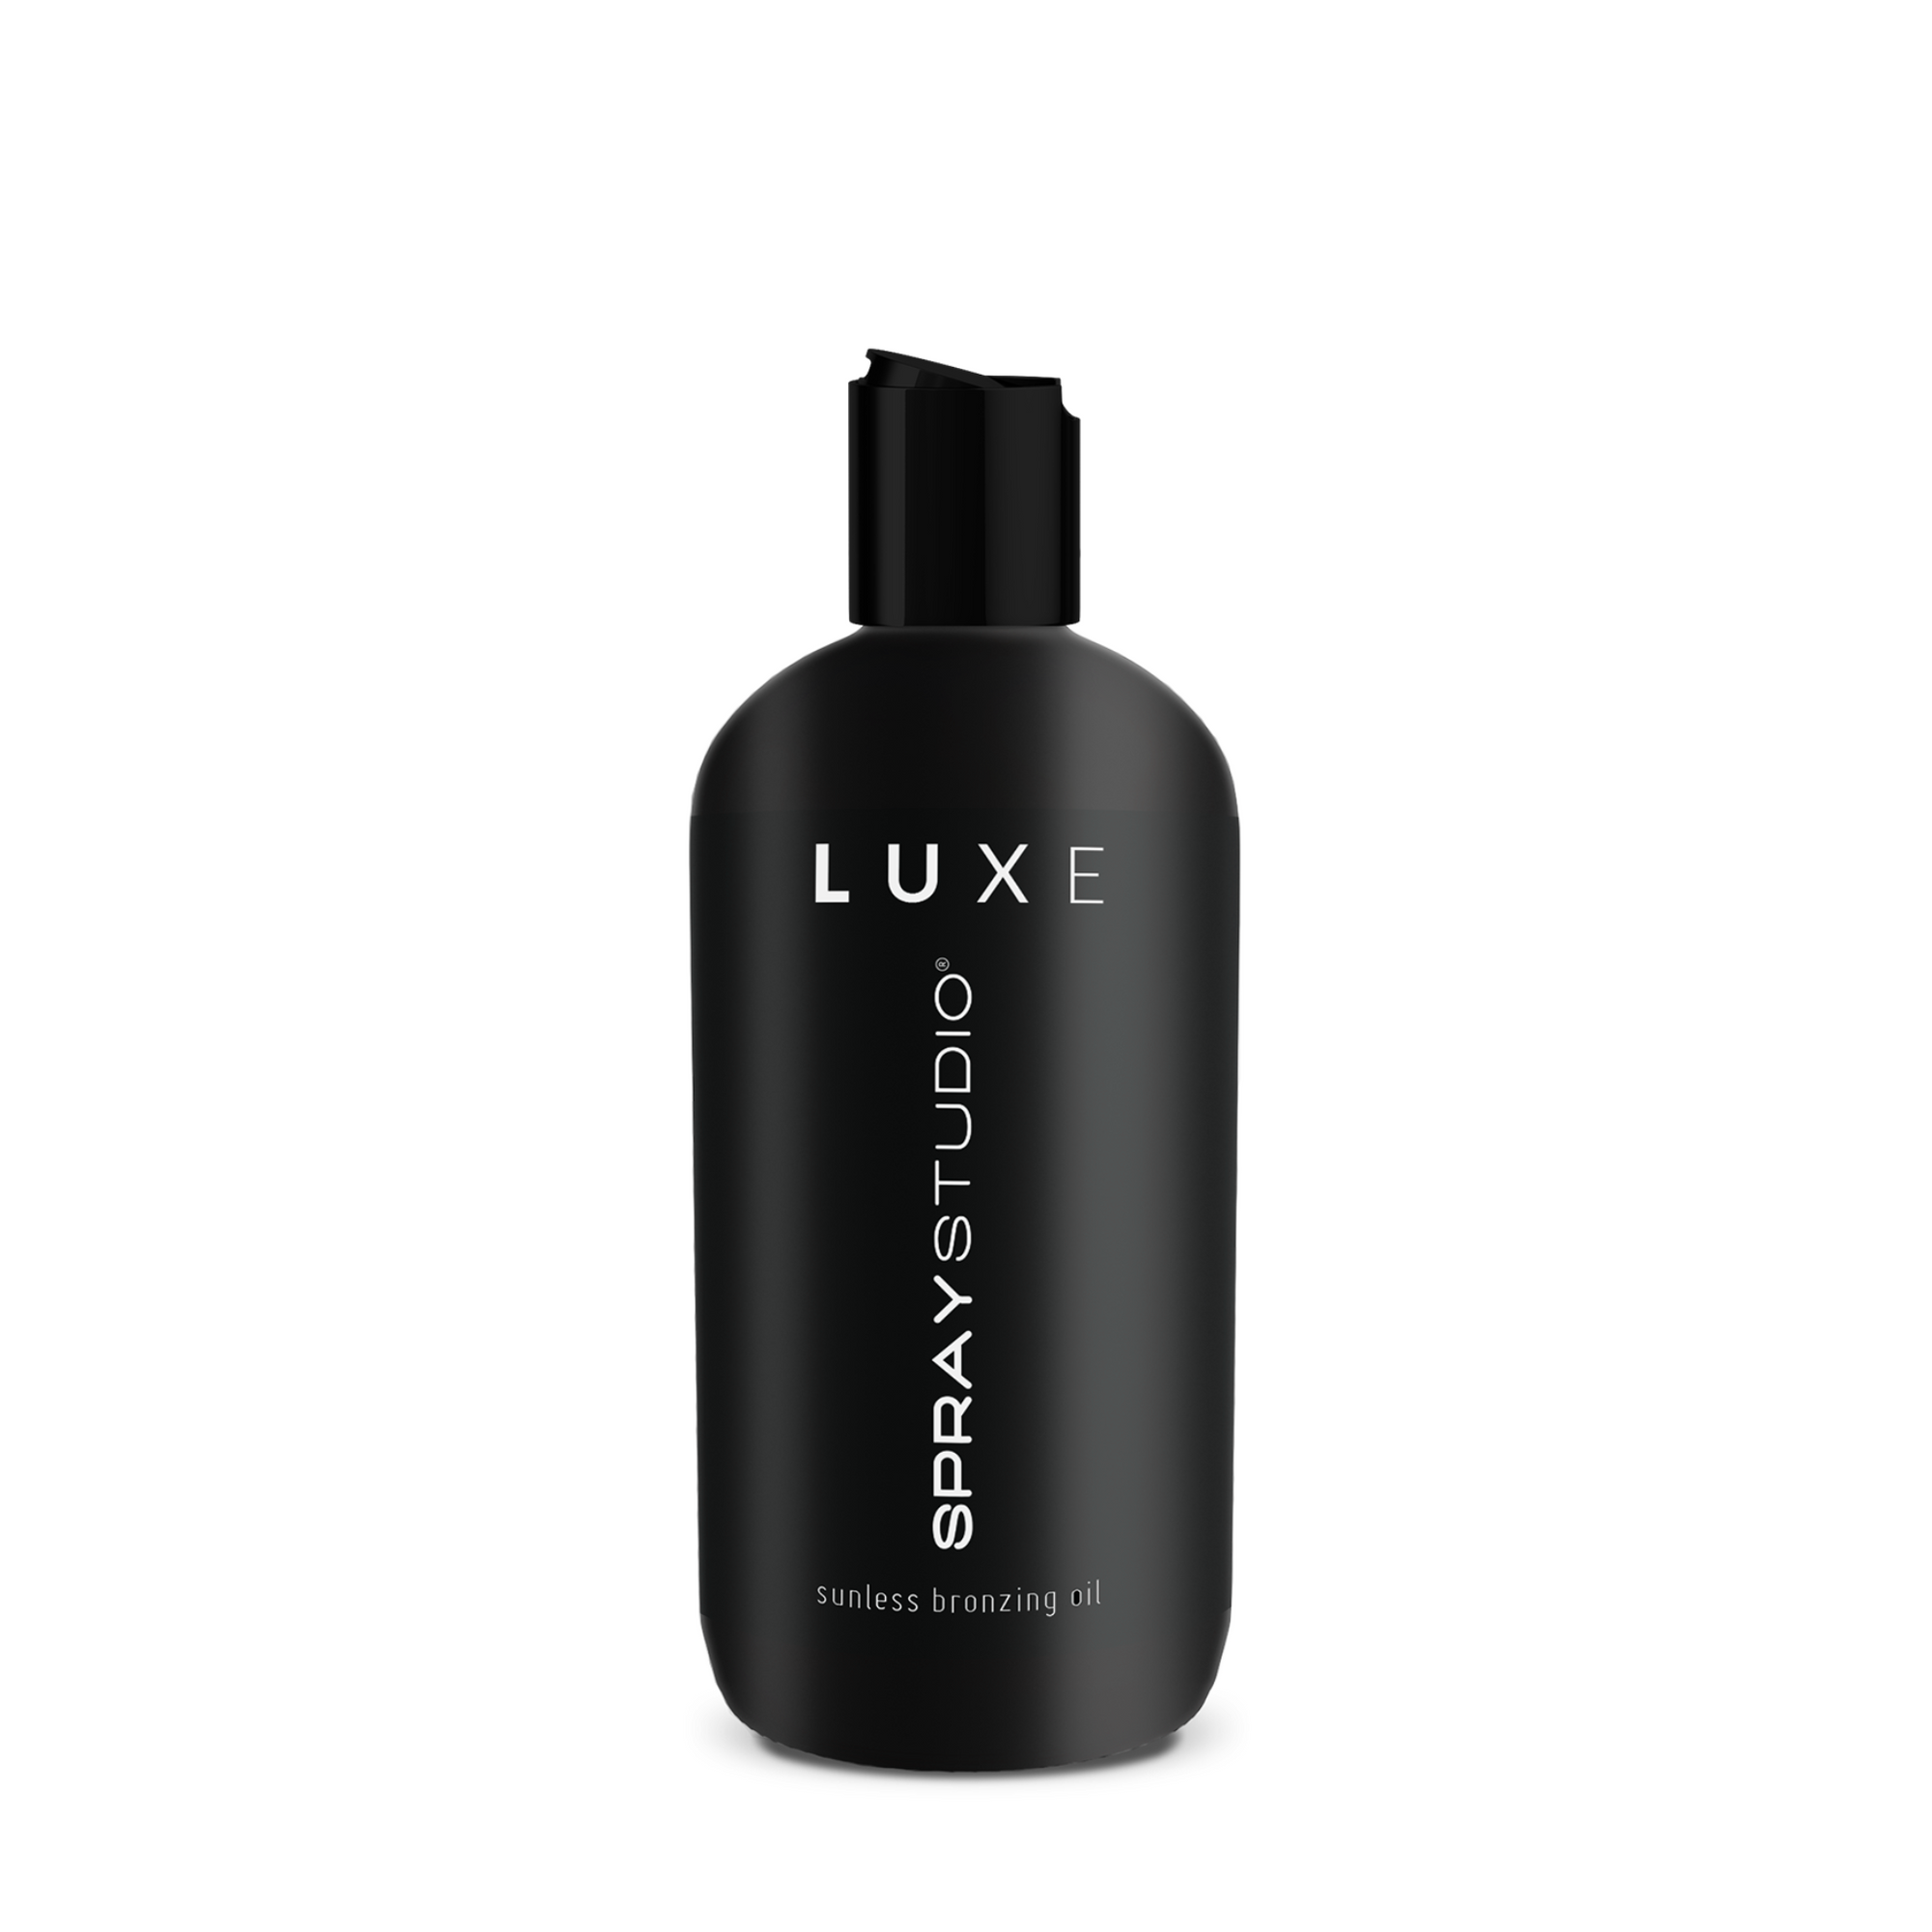 LUXE Sunless Bronzing Oil